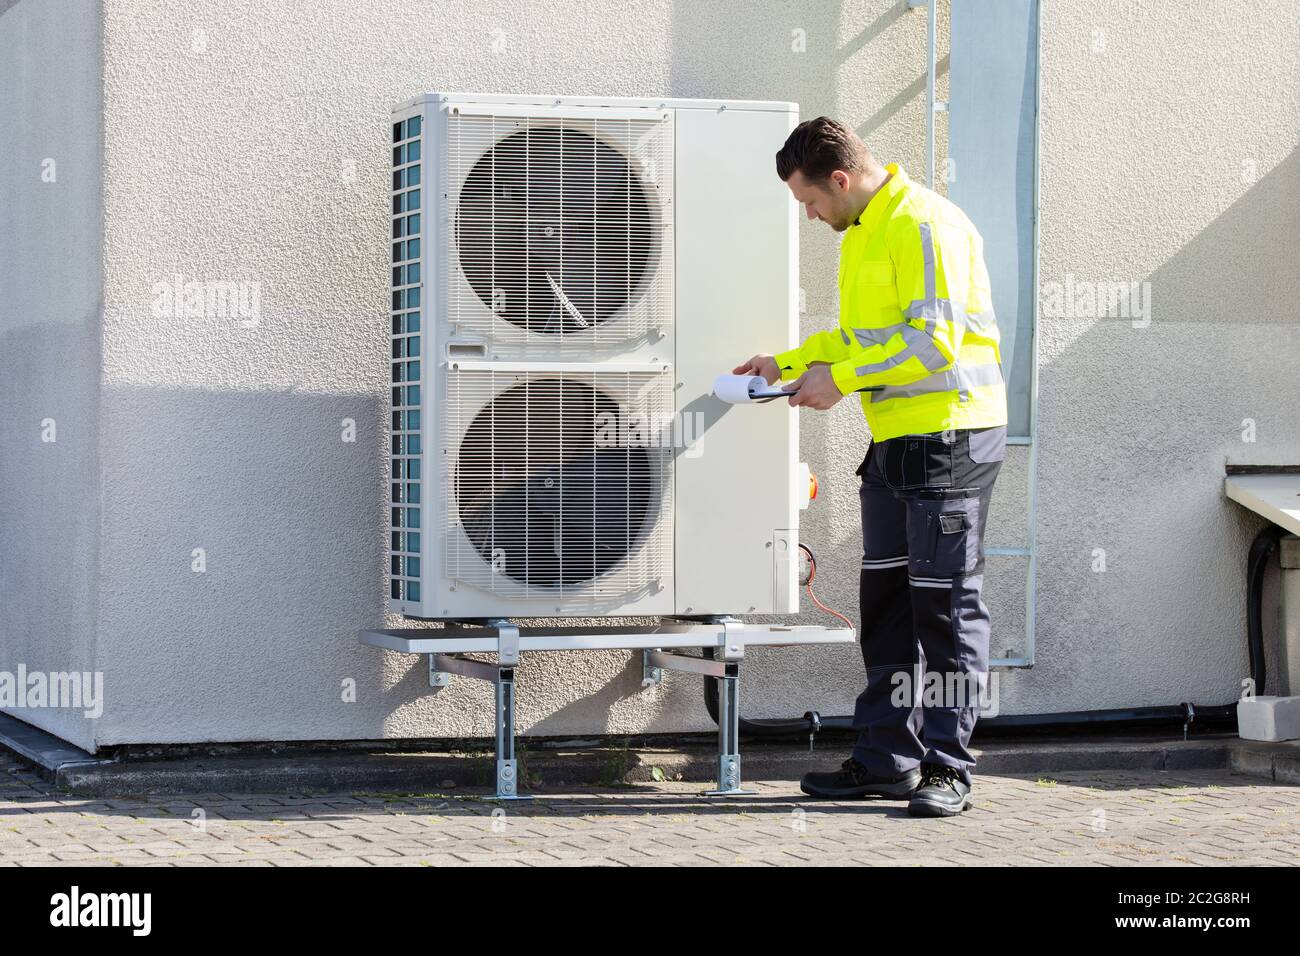 Young Male Technician Wearing Safety Jacket Looking At Air Conditioner Unit  Making Notes Stock Photo - Alamy